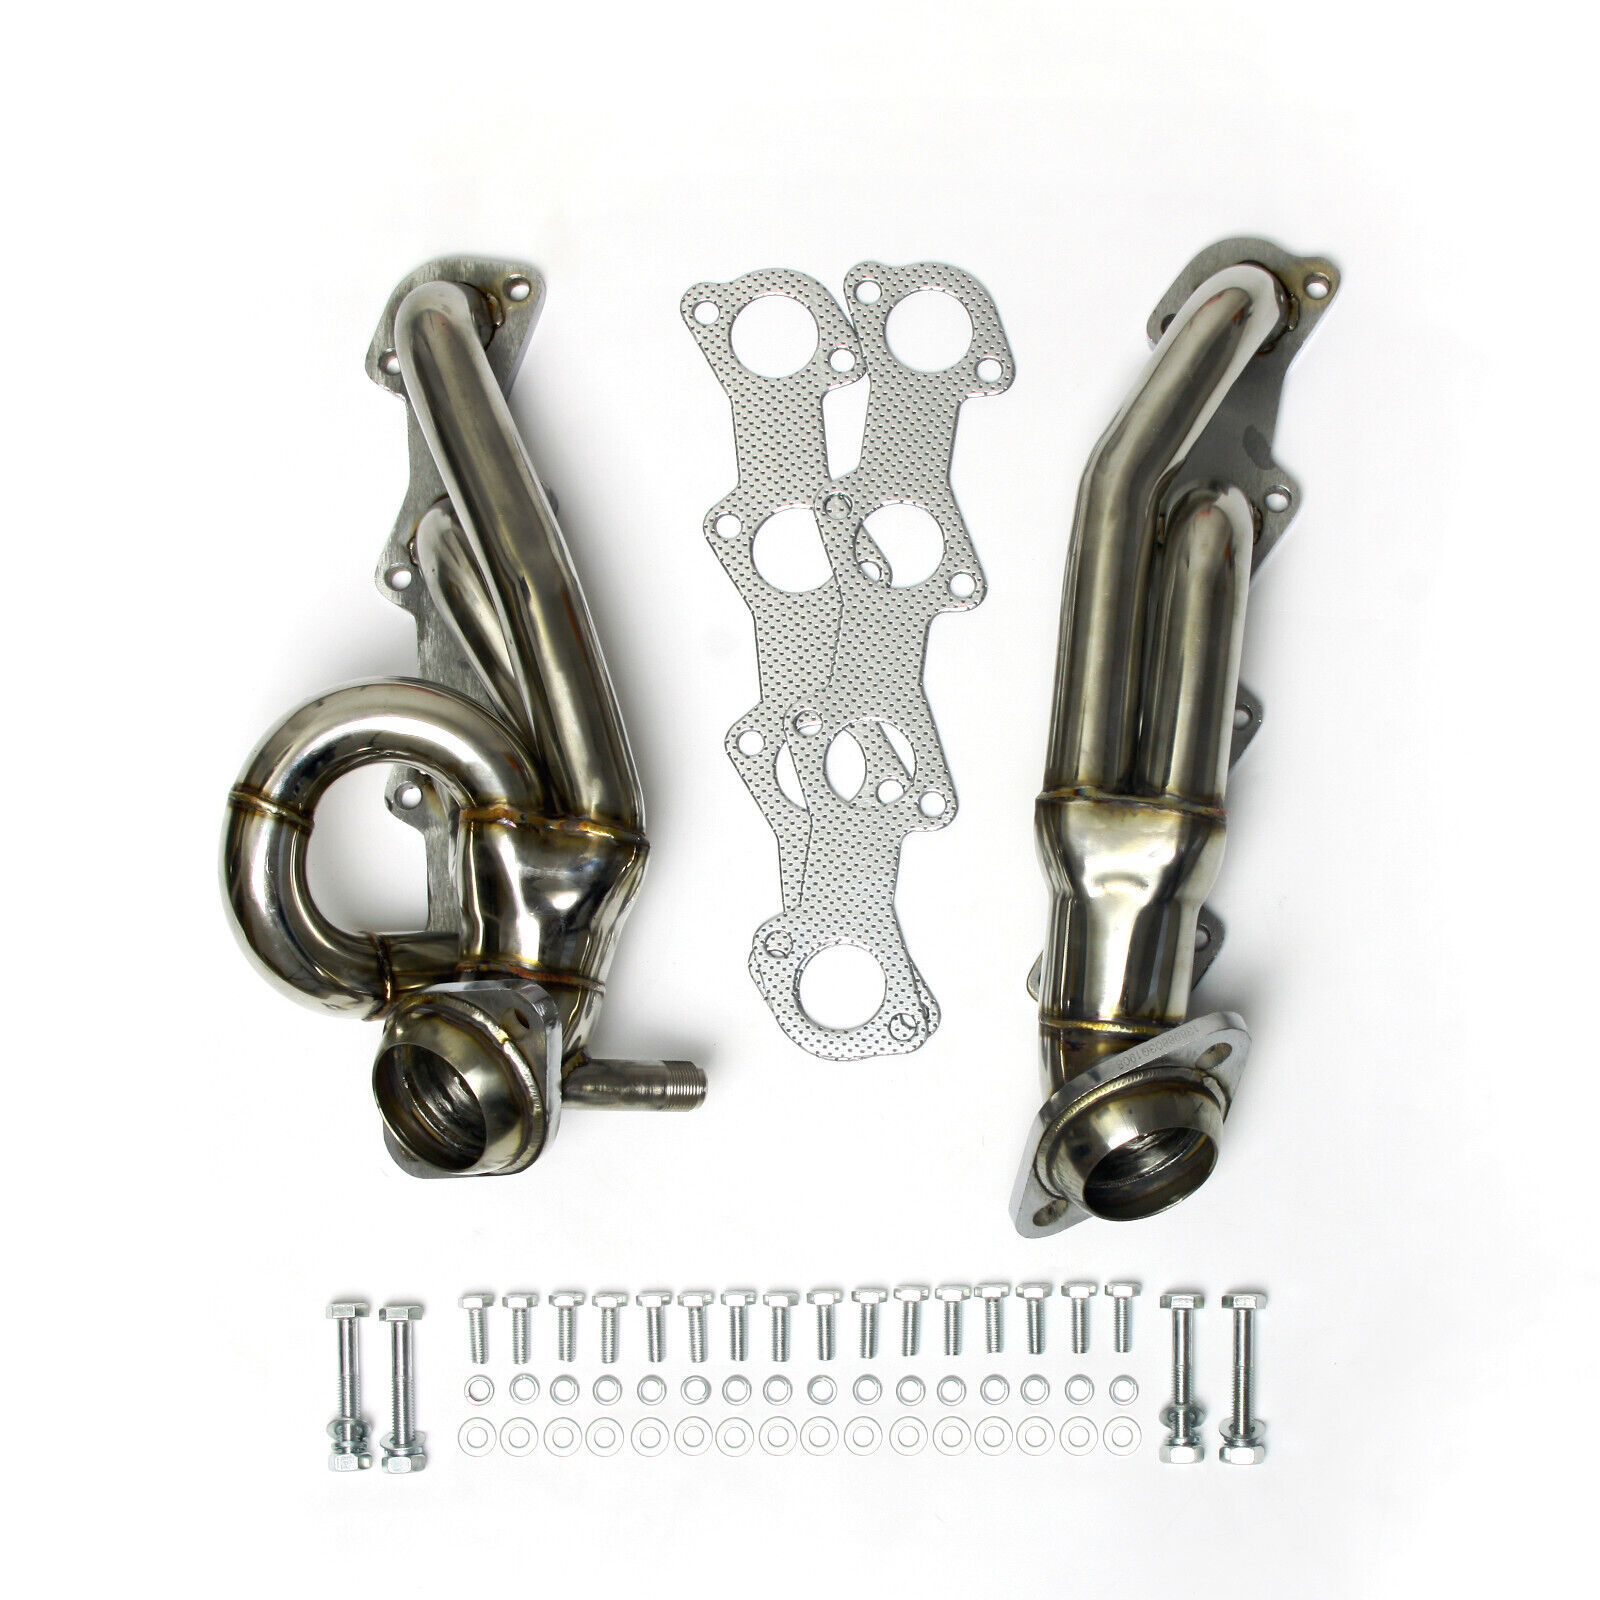 Exhaust Manifold Headers For Ford F150/F250/Expedition 4.6L V8 Truck/SUV